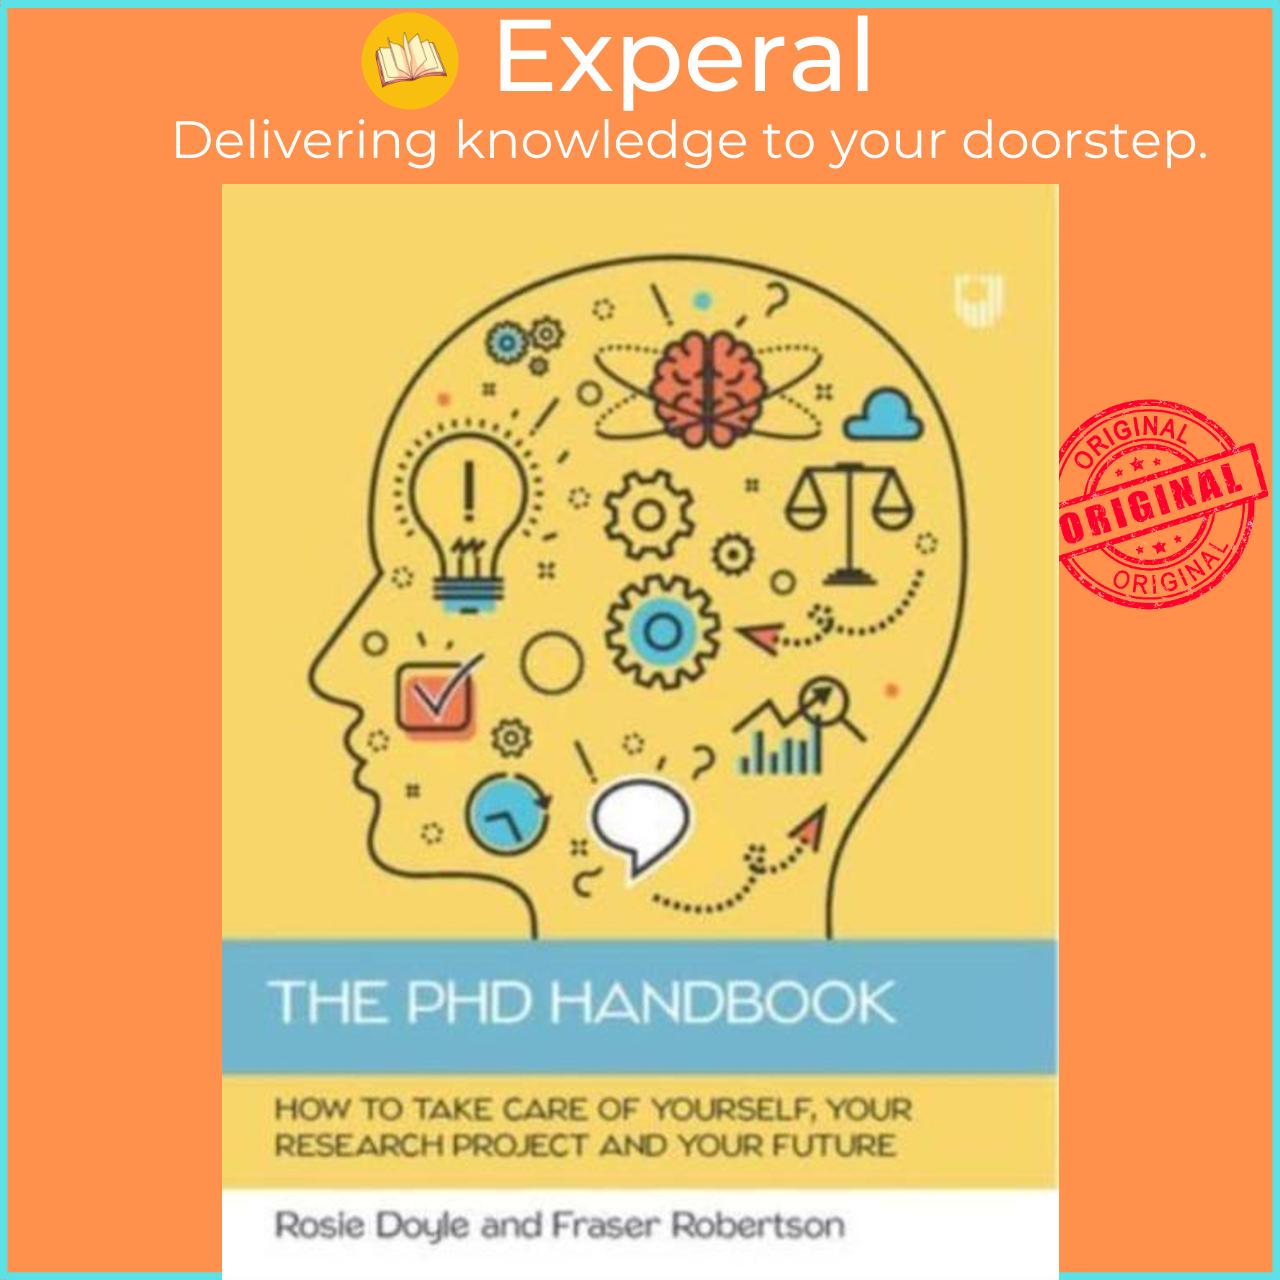 Sách - The PhD Handbook: How to Take Care of Yourself, Your Research Project a by Rosemary Doyle (UK edition, paperback)